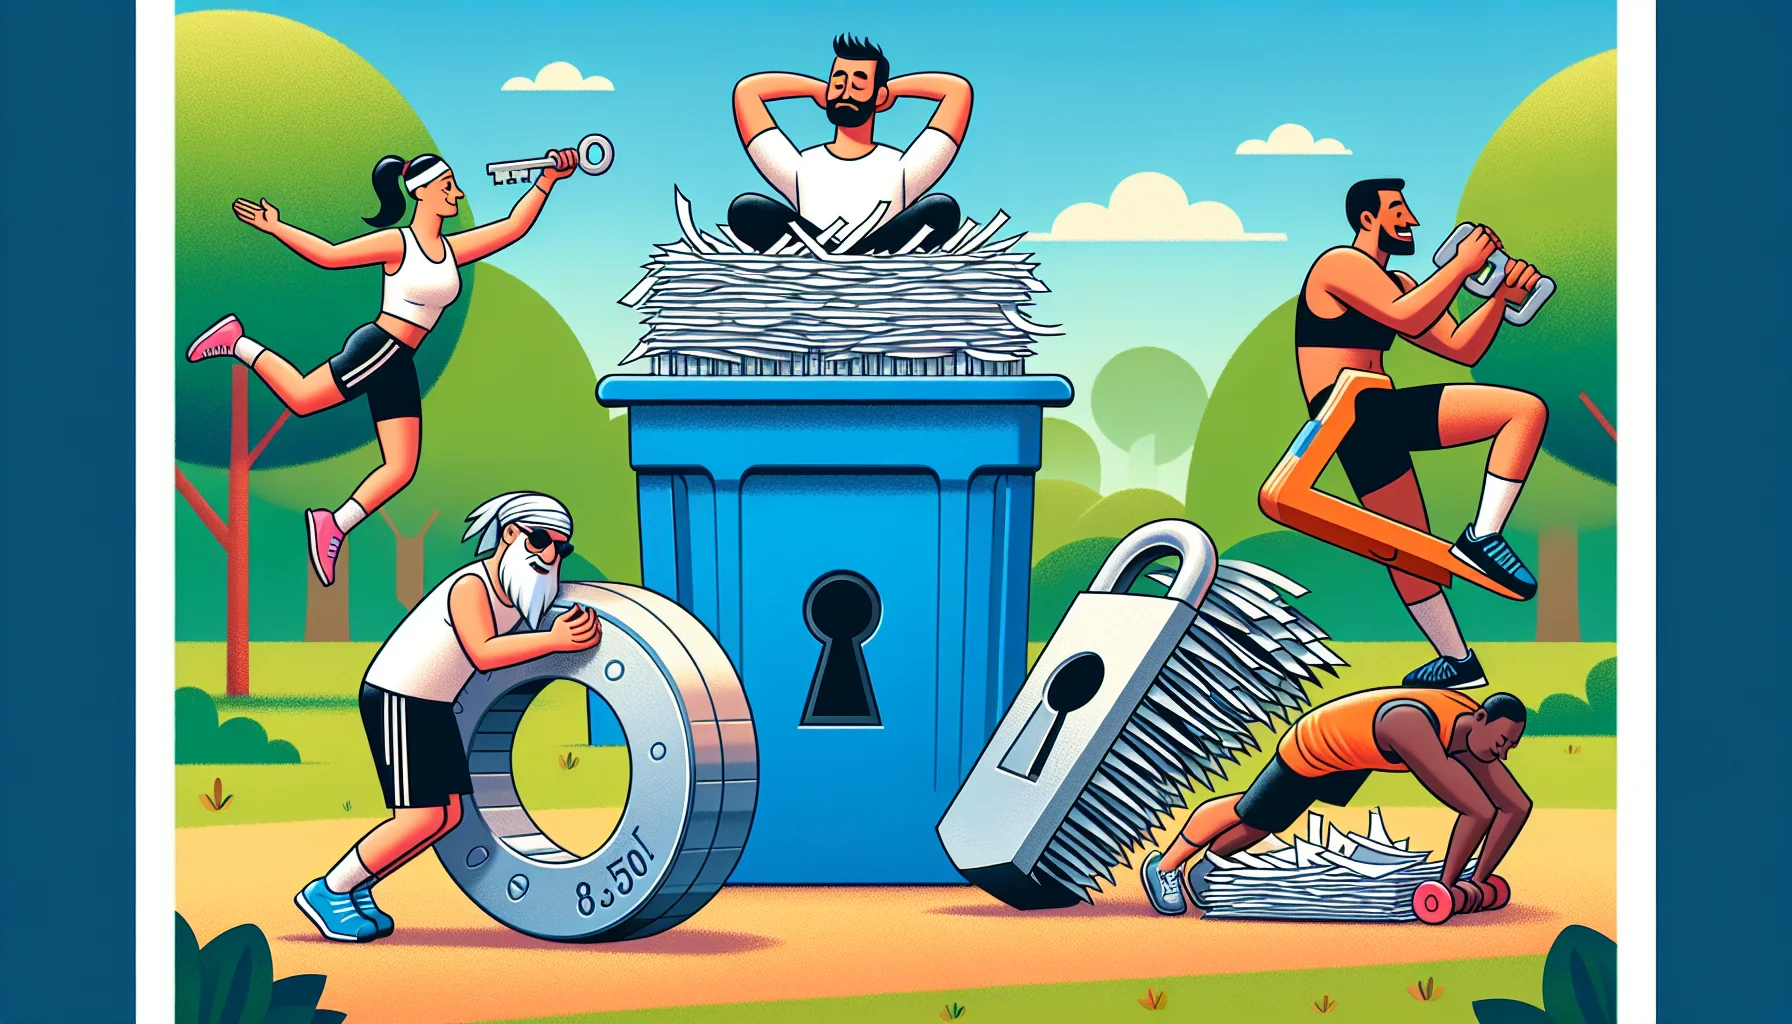 Create a humorous and appealing scenario showing the importance of staying fit and protecting one's personal information at the same time. This could be a park scene where a Caucasian woman is jogging while guarding a huge paper shredder filled with paperwork, and a Middle-Eastern man is doing push-ups with one hand while using the other to block an oversized keyhole. Further along, a South-Asian man can be seen practicing yoga while balancing a large padlock on his head and a black woman could be seen boxing an oversized firewall symbol. All of them are wearing sportswear and are evidently enjoying their workout routines.